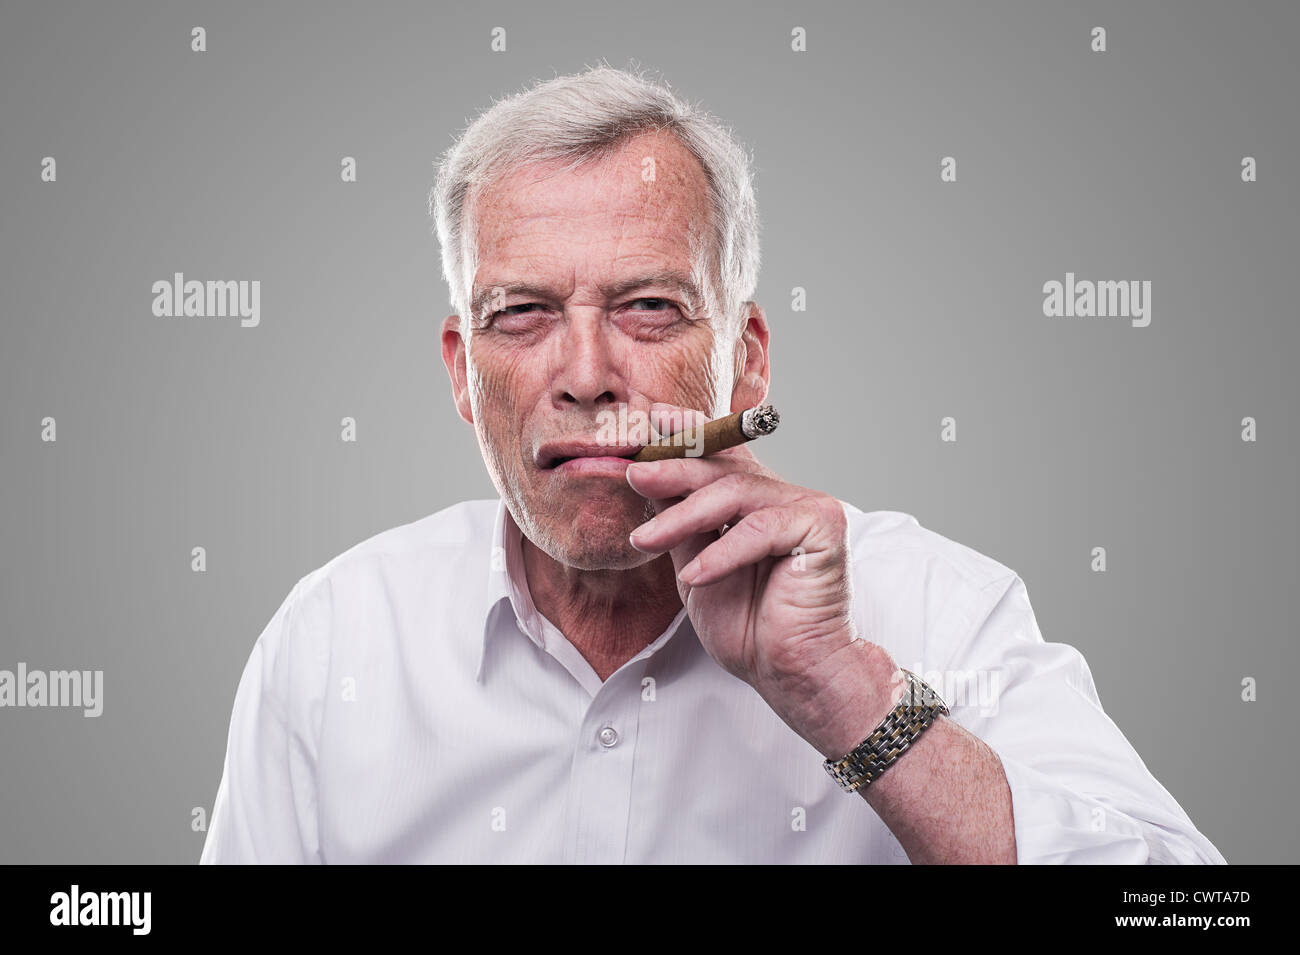 Handsome senior man with a shrewd expression and strong personaity smoking a cigar isolated on a grey studio background Stock Photo